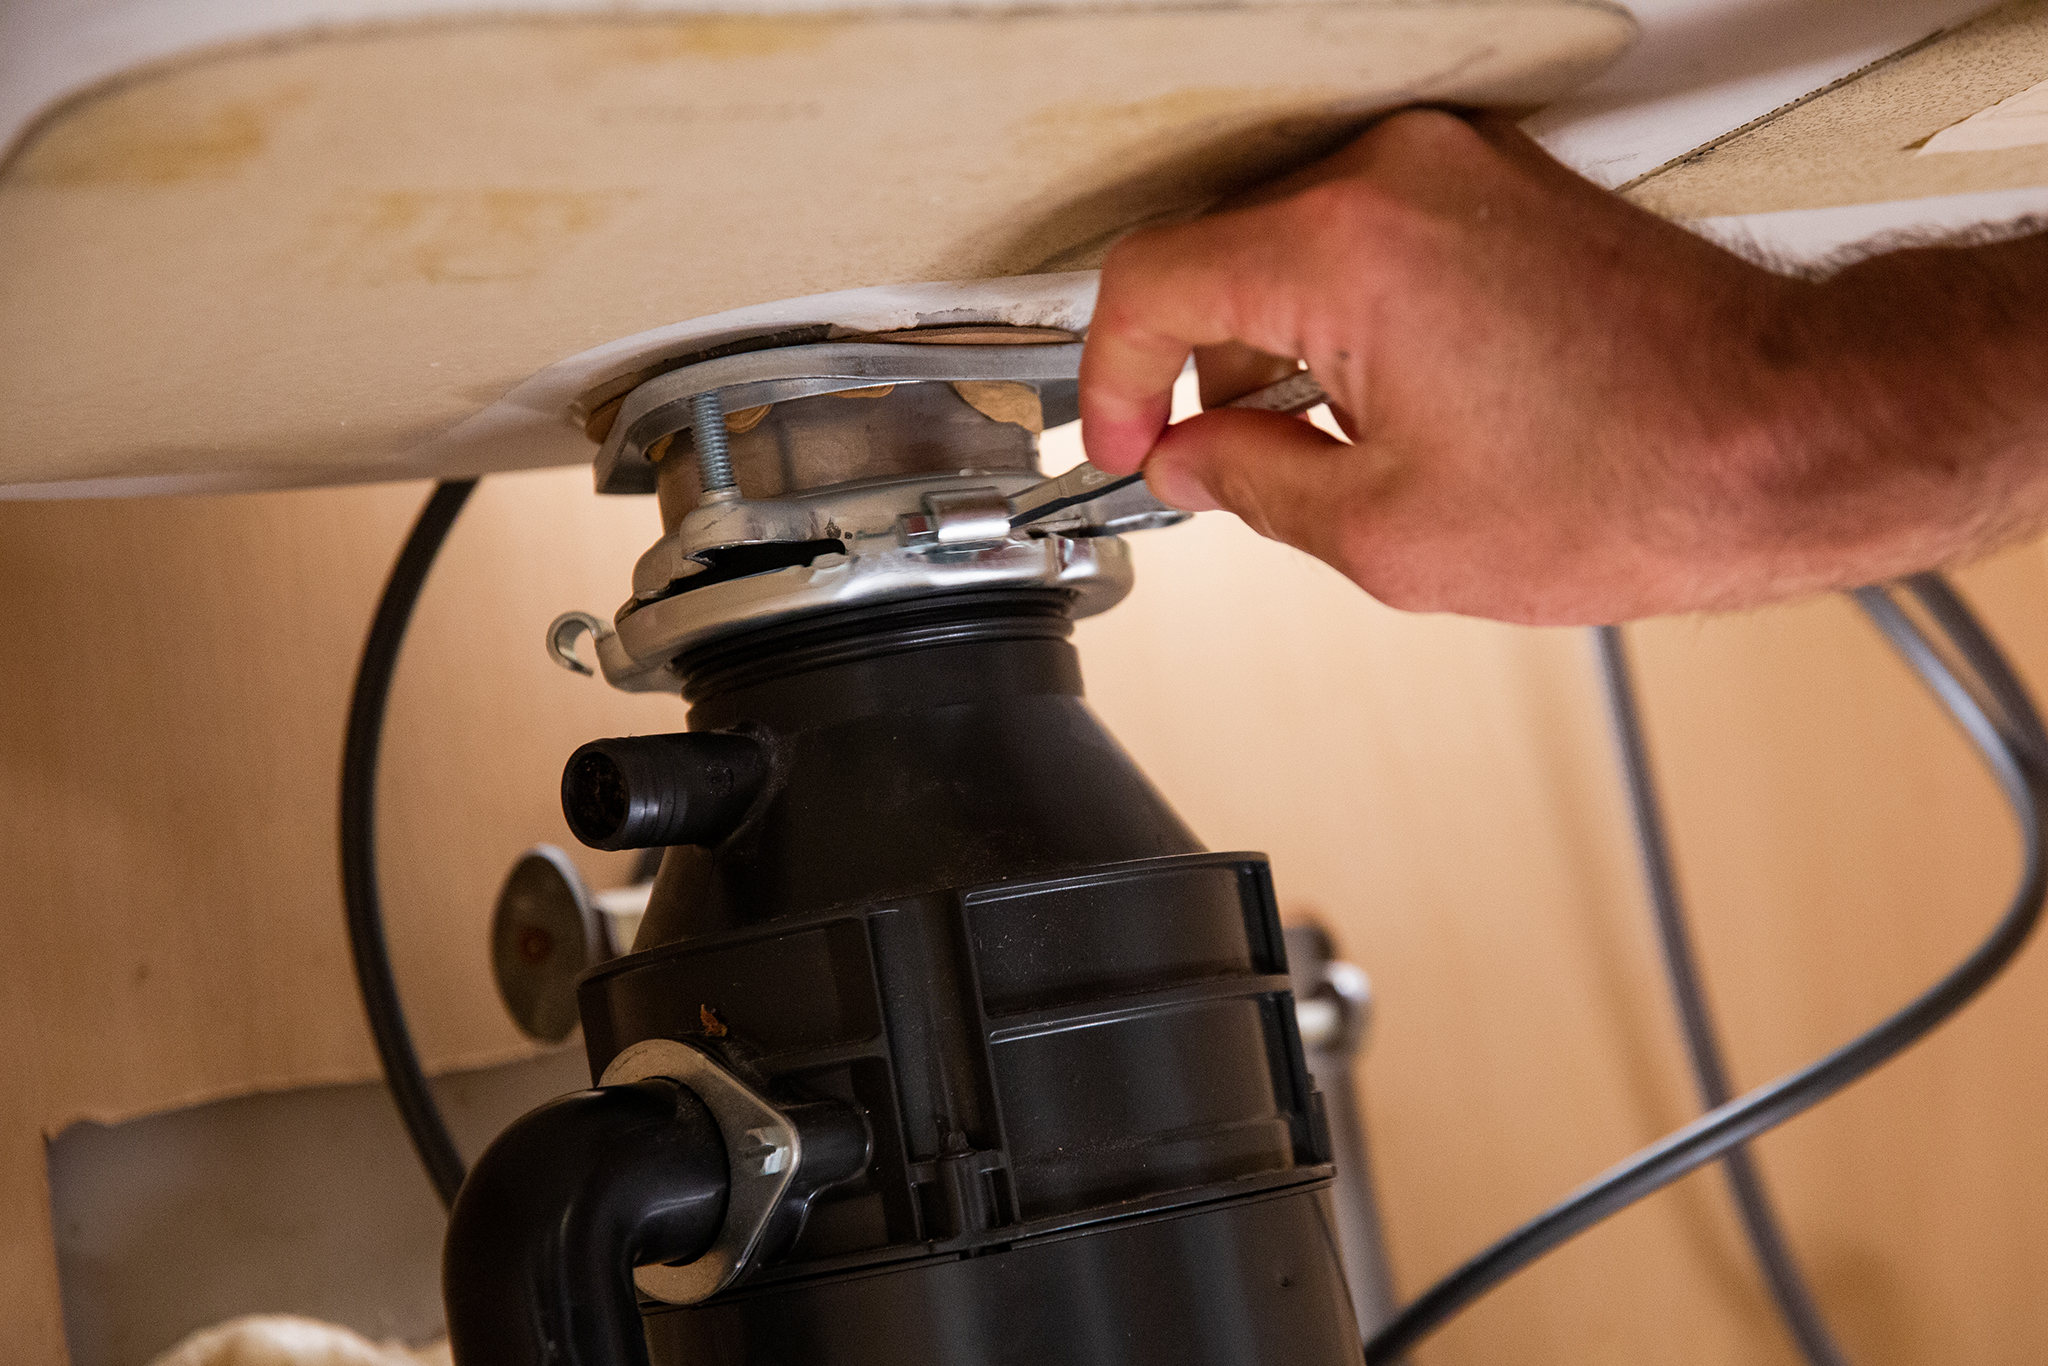 how to replace garbage disposal that is backing up